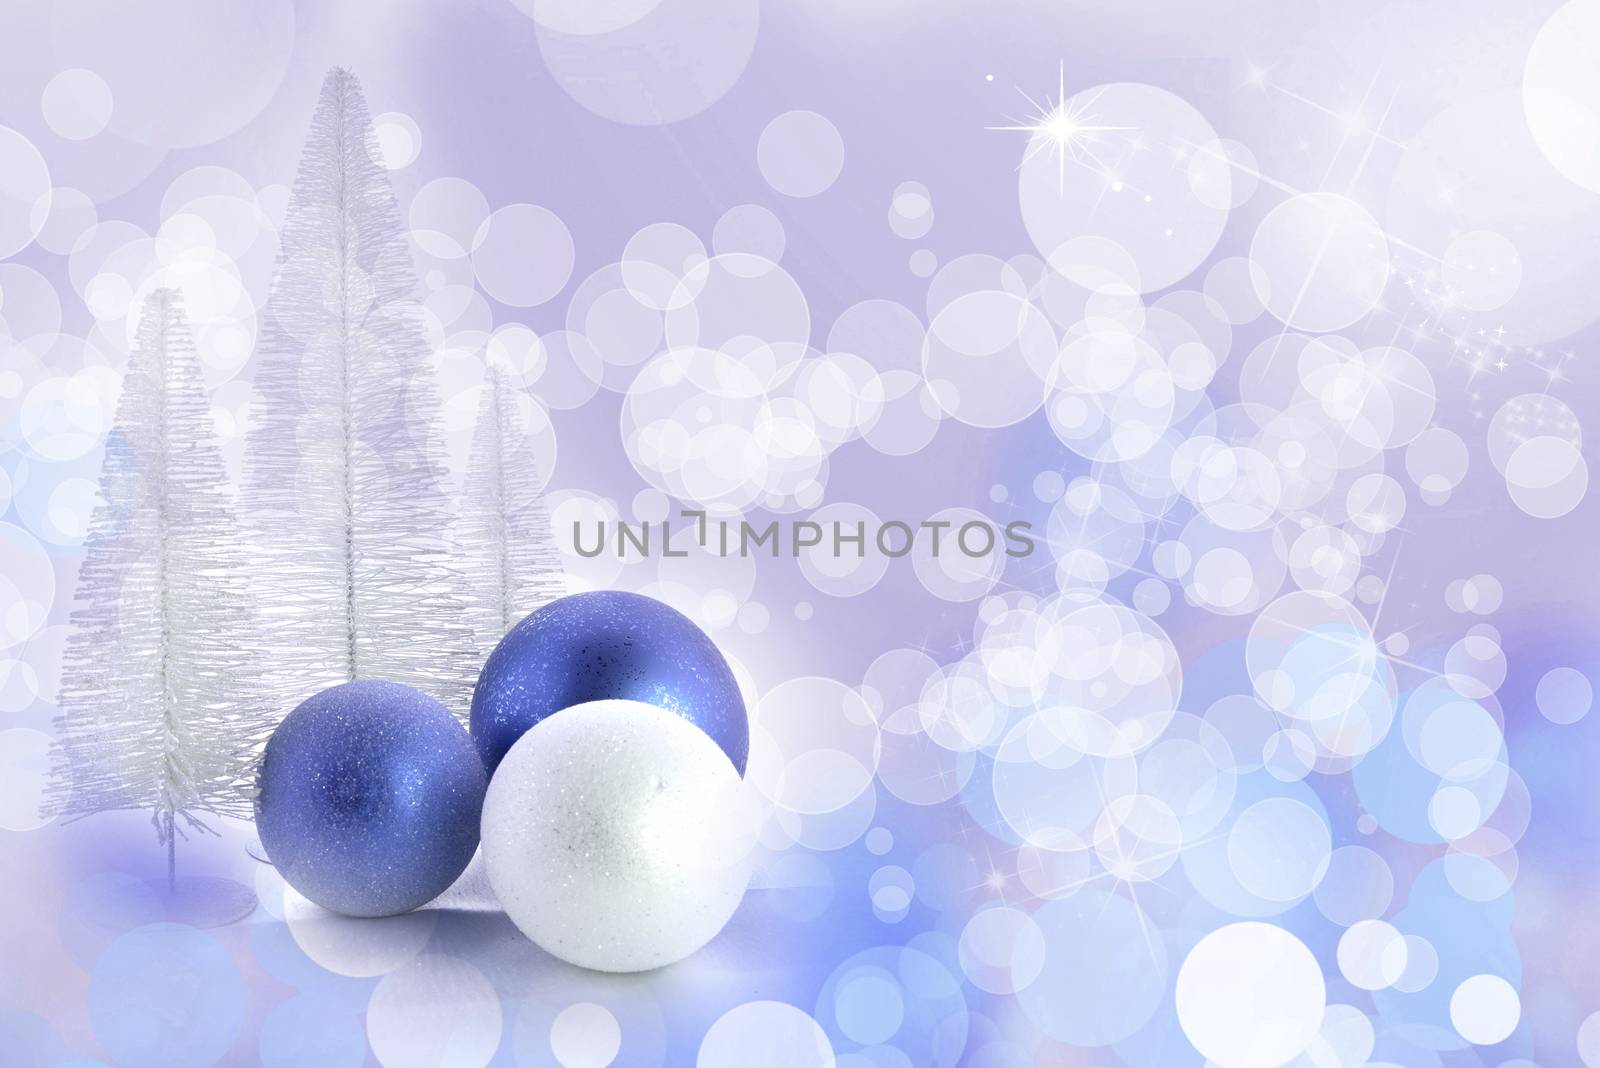 Chtistmas decor over blue bokeh background